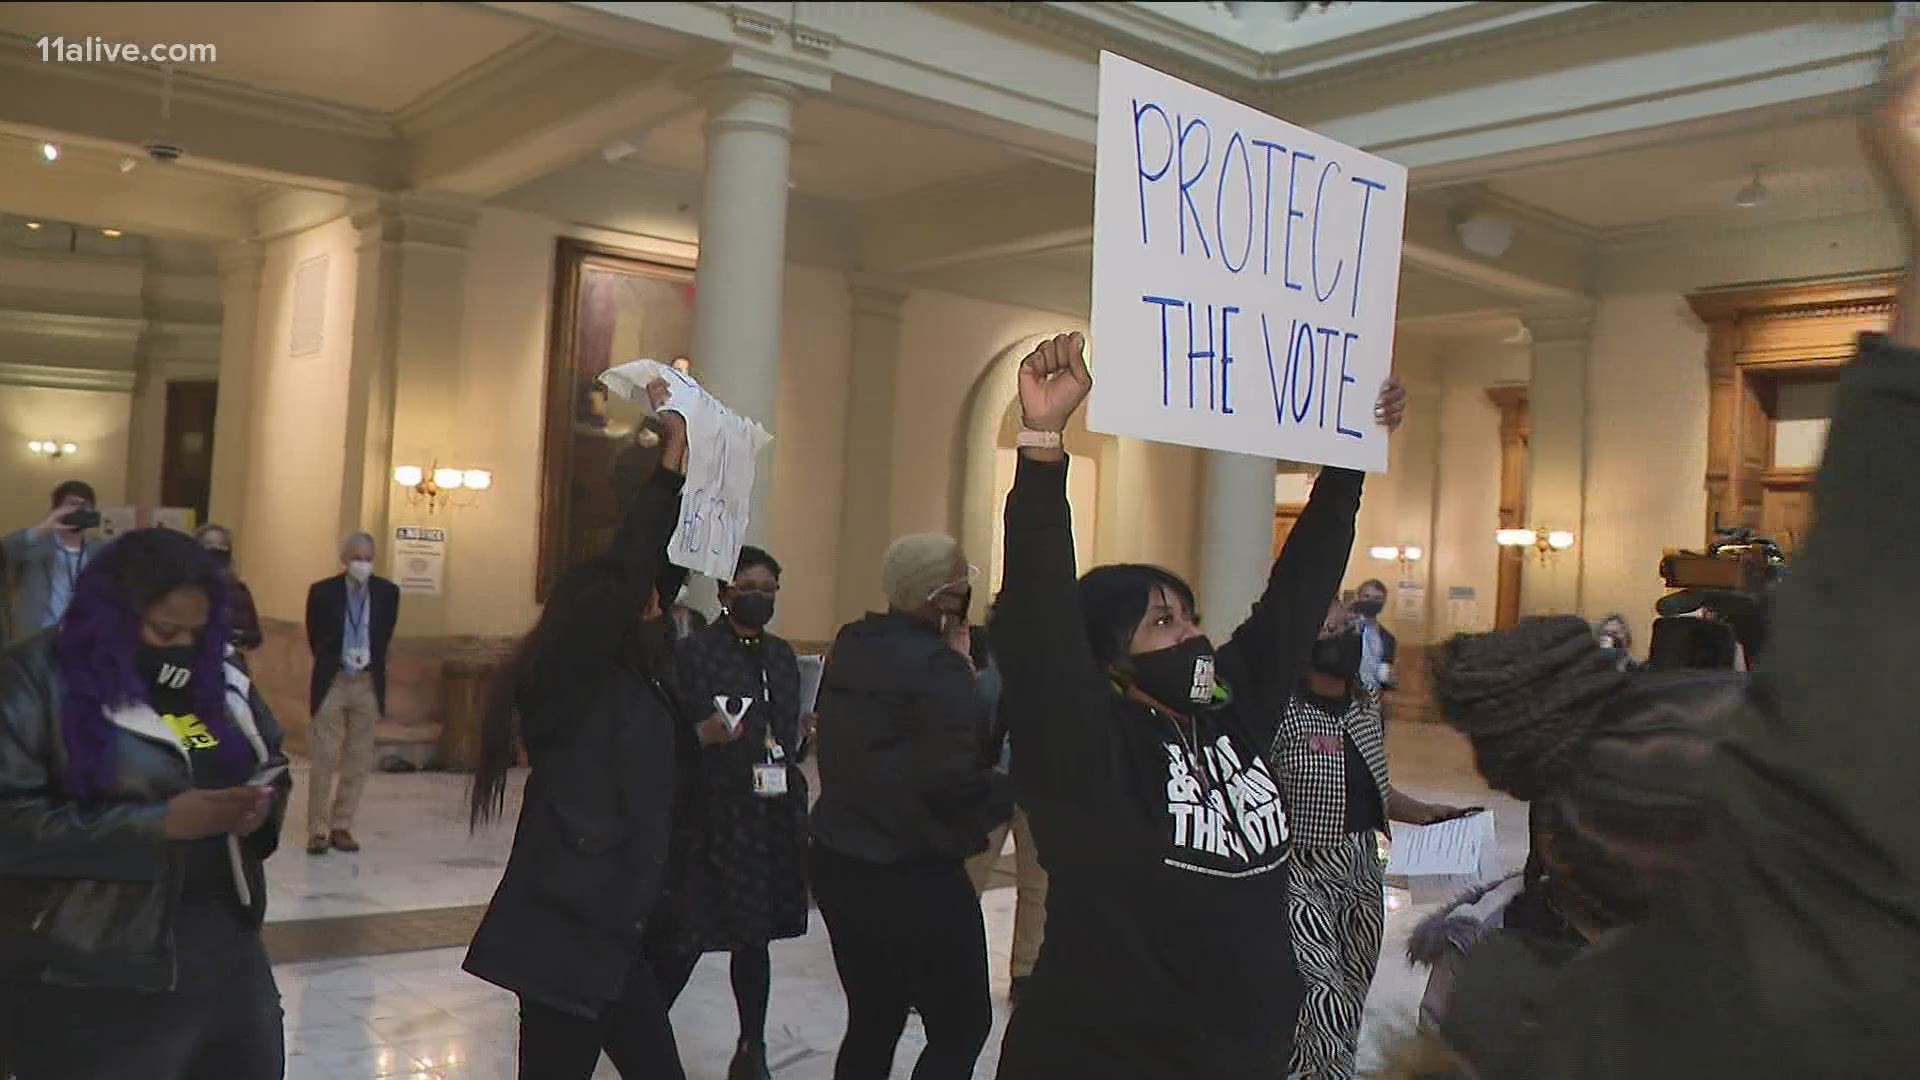 The Democratic lawmakers were protesting the proposed election reform bills making their way through the House.